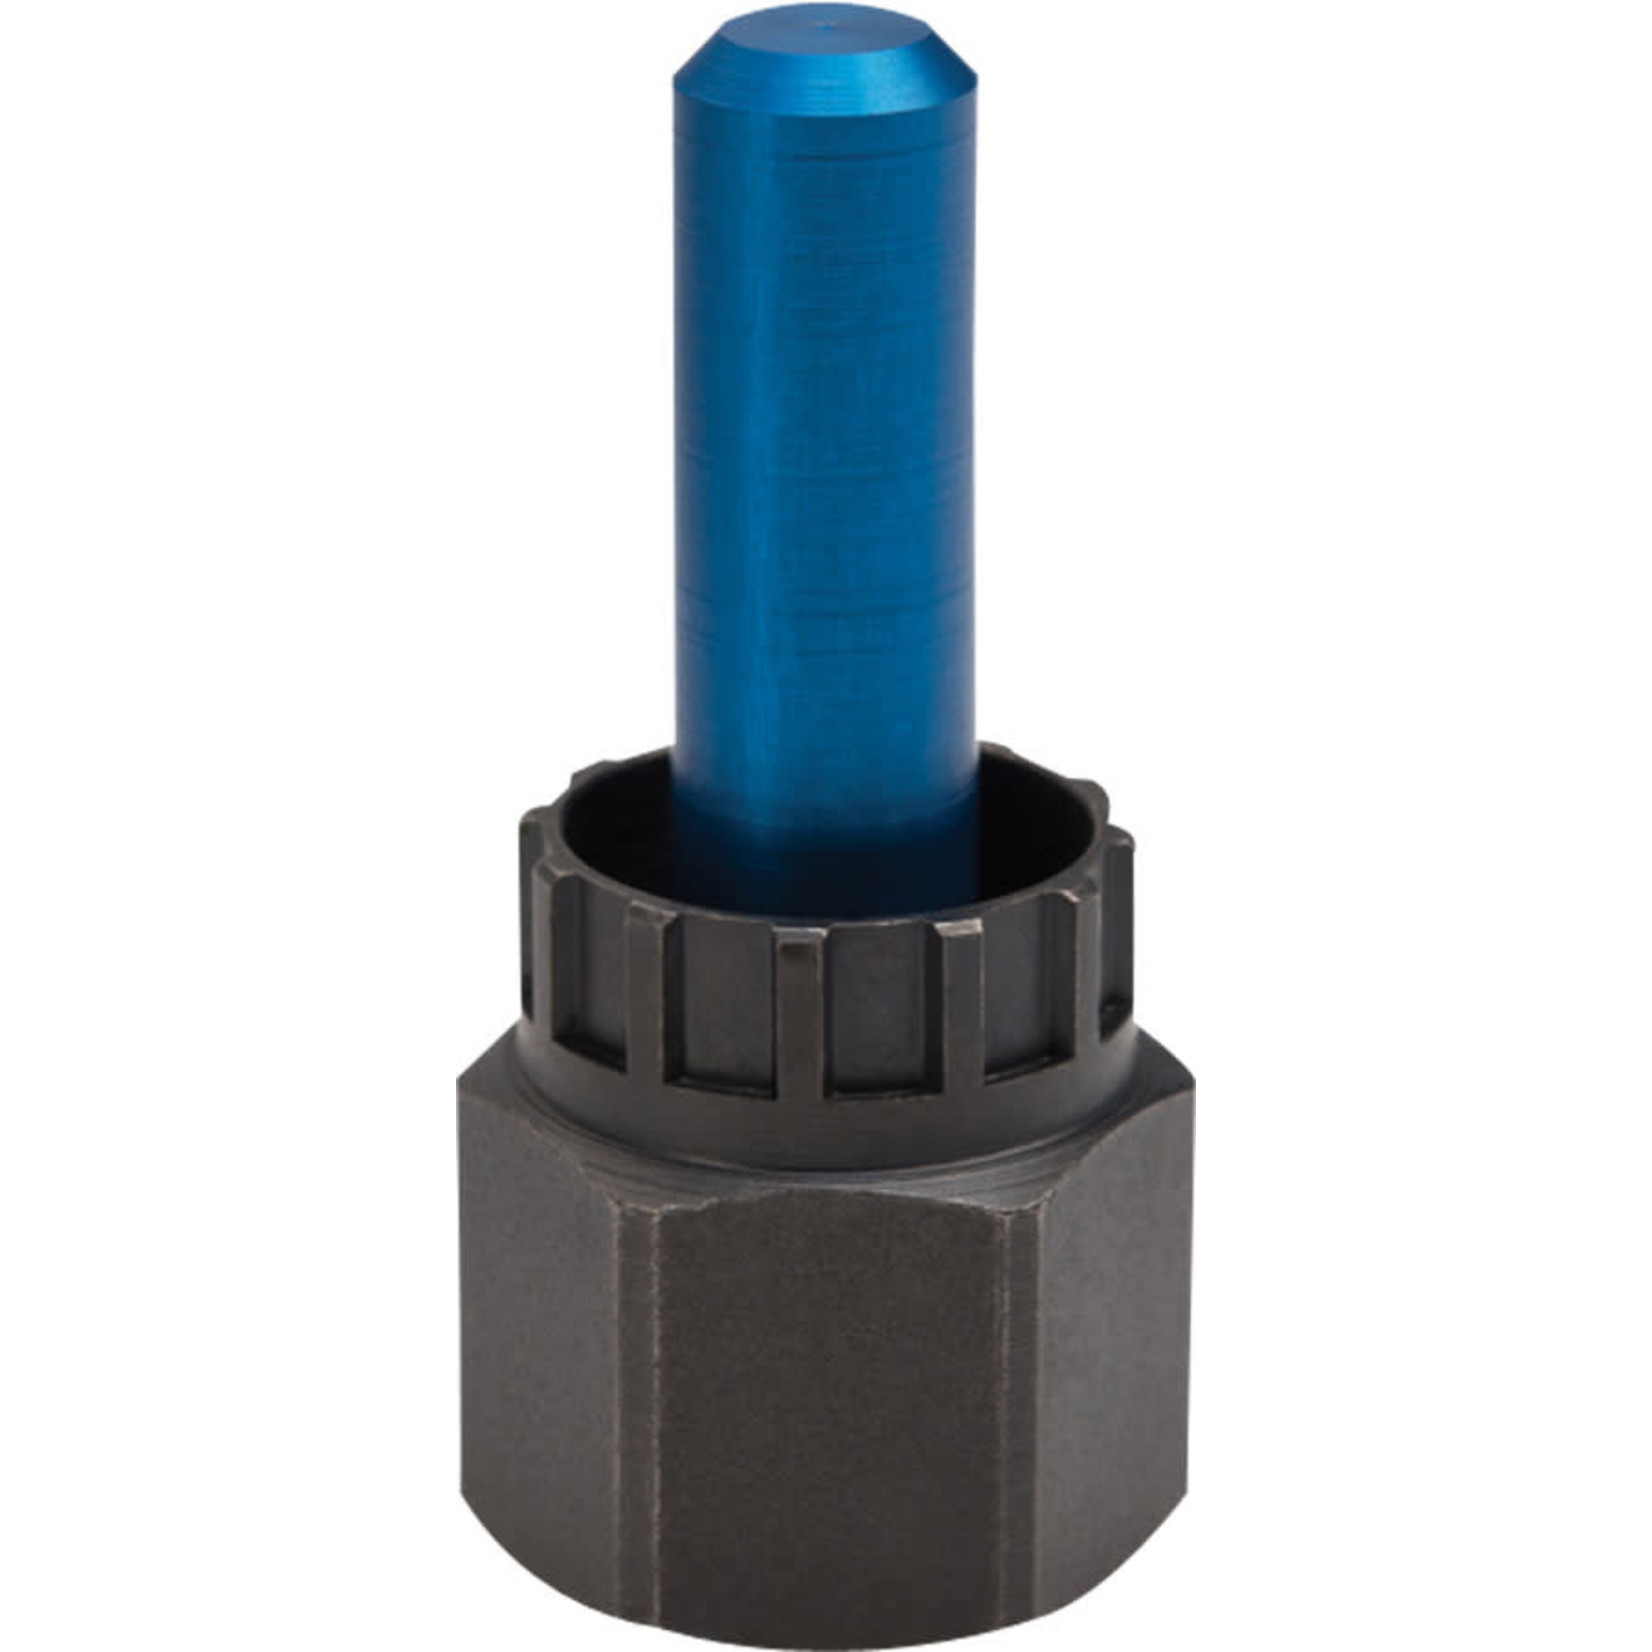 Park Tool Park Tool FR-5.2GT Cassette Lockring Tool with 12mm Guide Pin